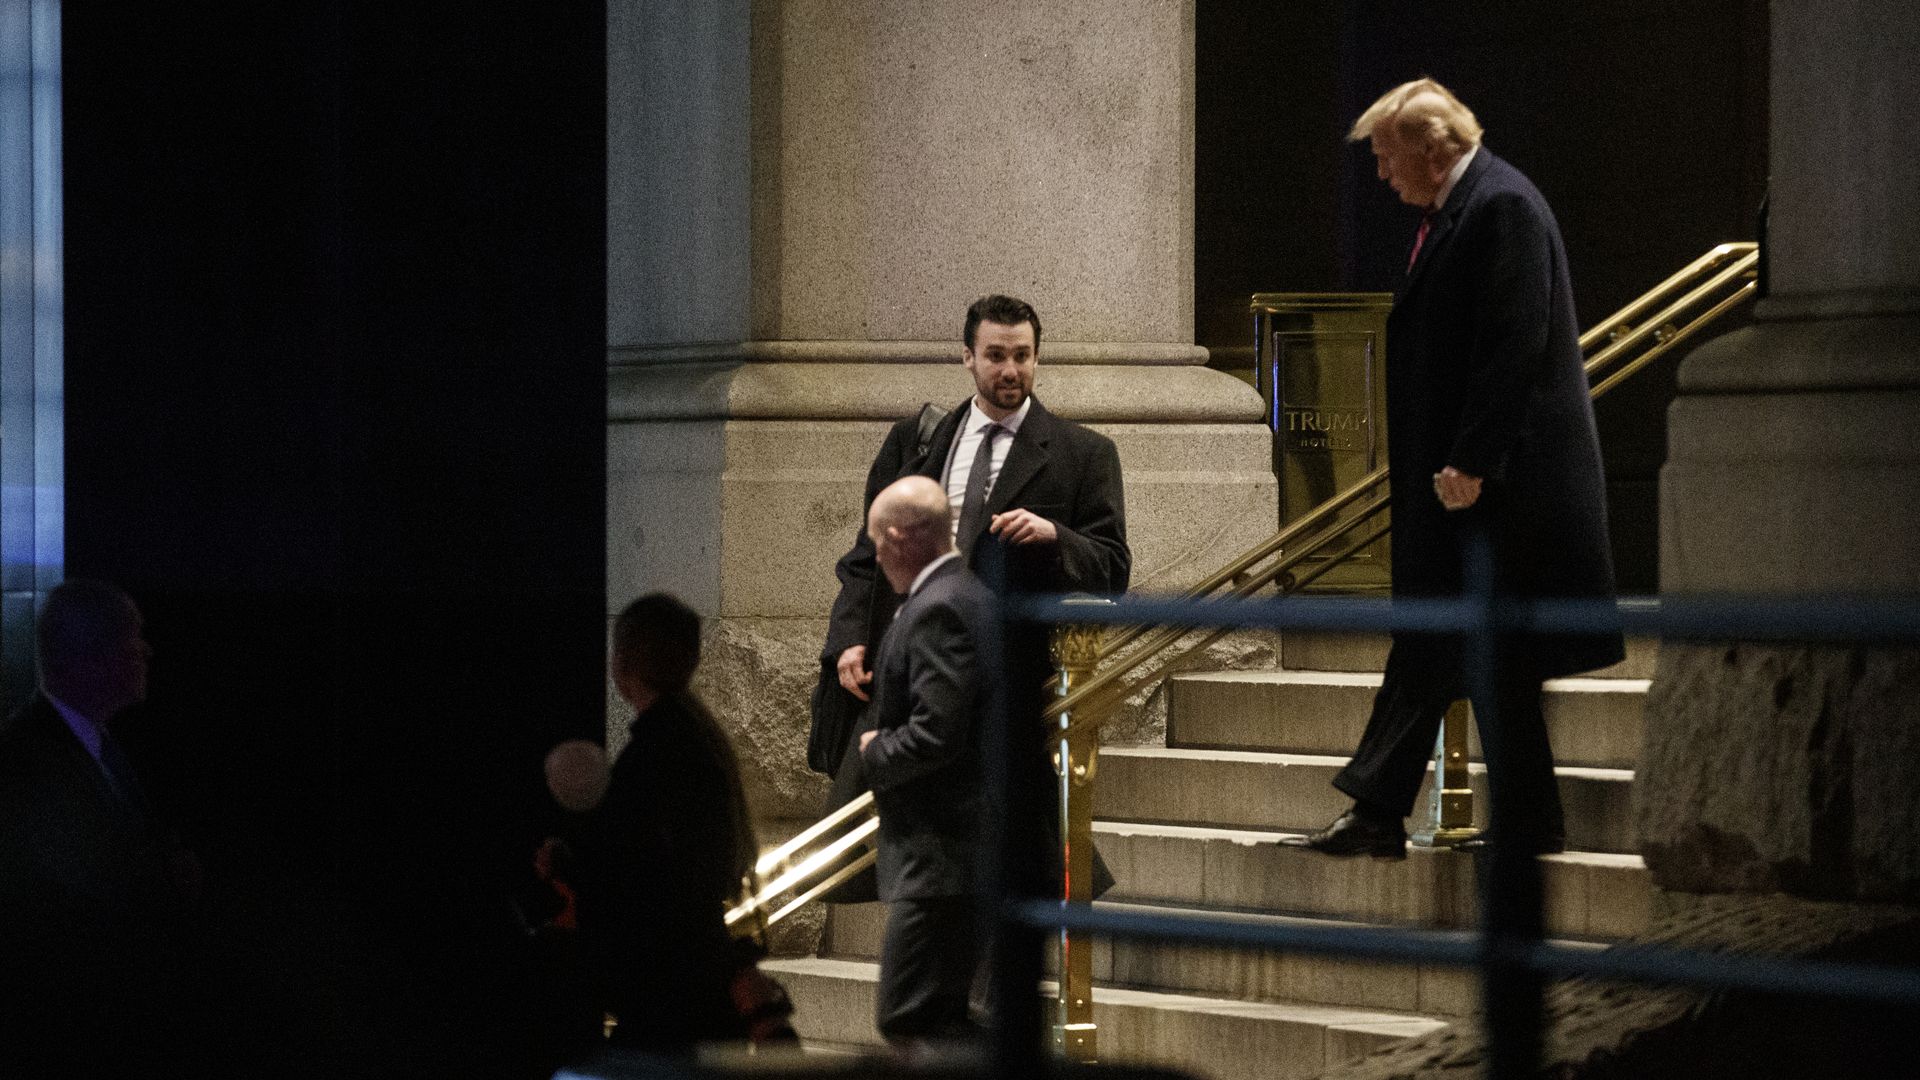 Former President Donald Trump exiting the former Trump International Hotel in Washington, D.C., in January 2019.